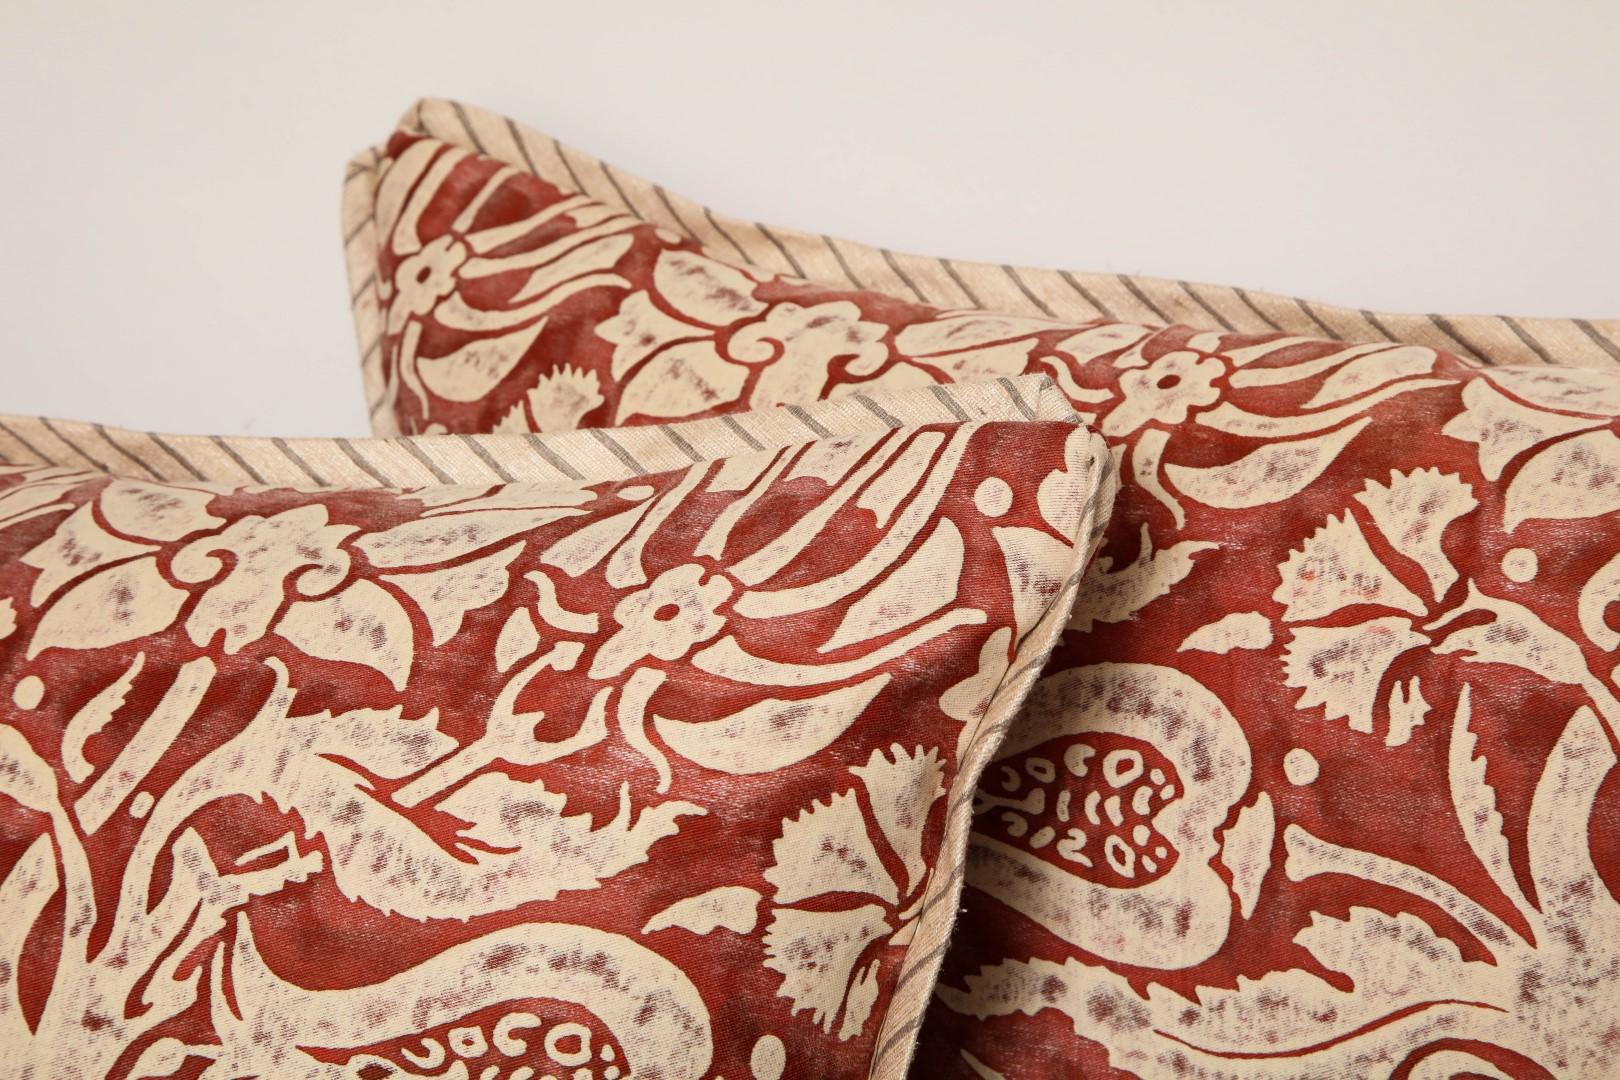 American Pair of Fortuny Fabric Cushions in the Malagrana Pattern